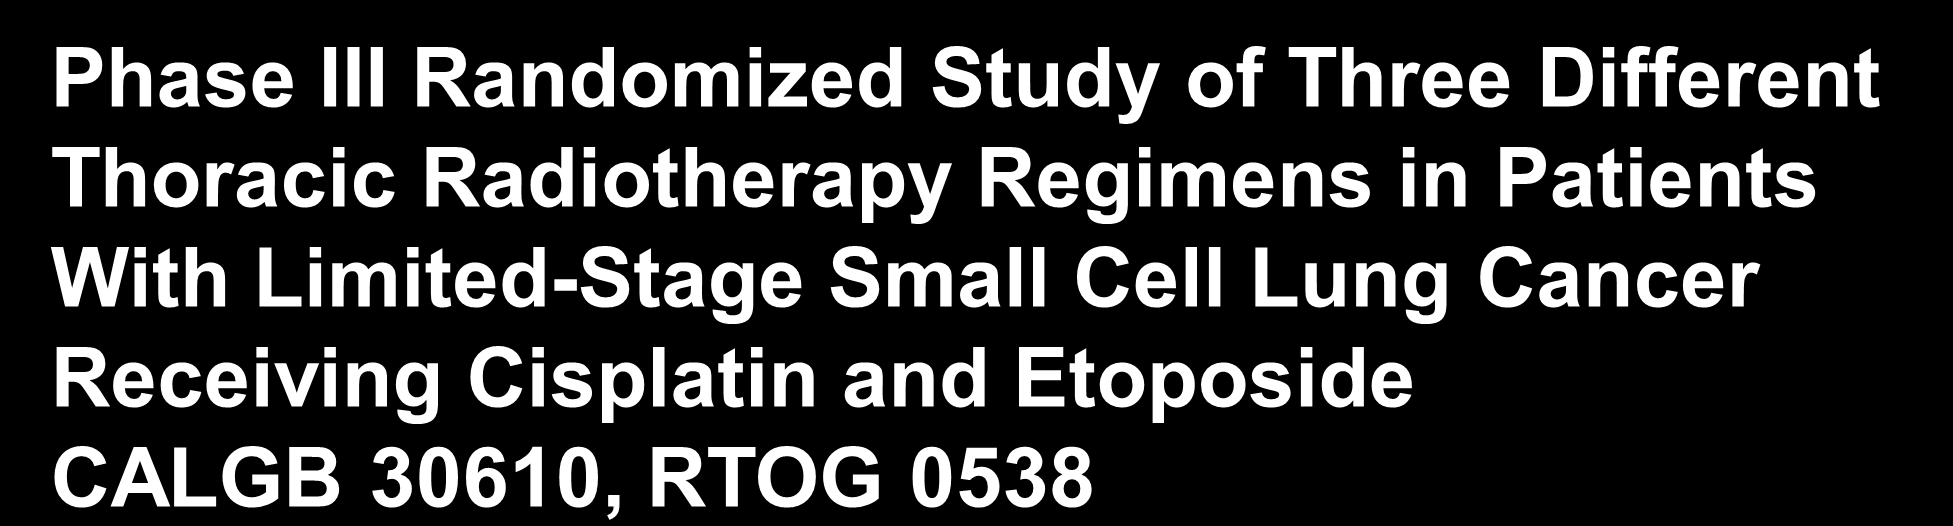 Phase III Randomized Study of Three Different Thoracic Radiotherapy Regimens in Patients With Limited-Stage Small Cell Lung Cancer Receiving Cisplatin and Etoposide CALGB 30610, RTOG 0538 1. KOL 45.